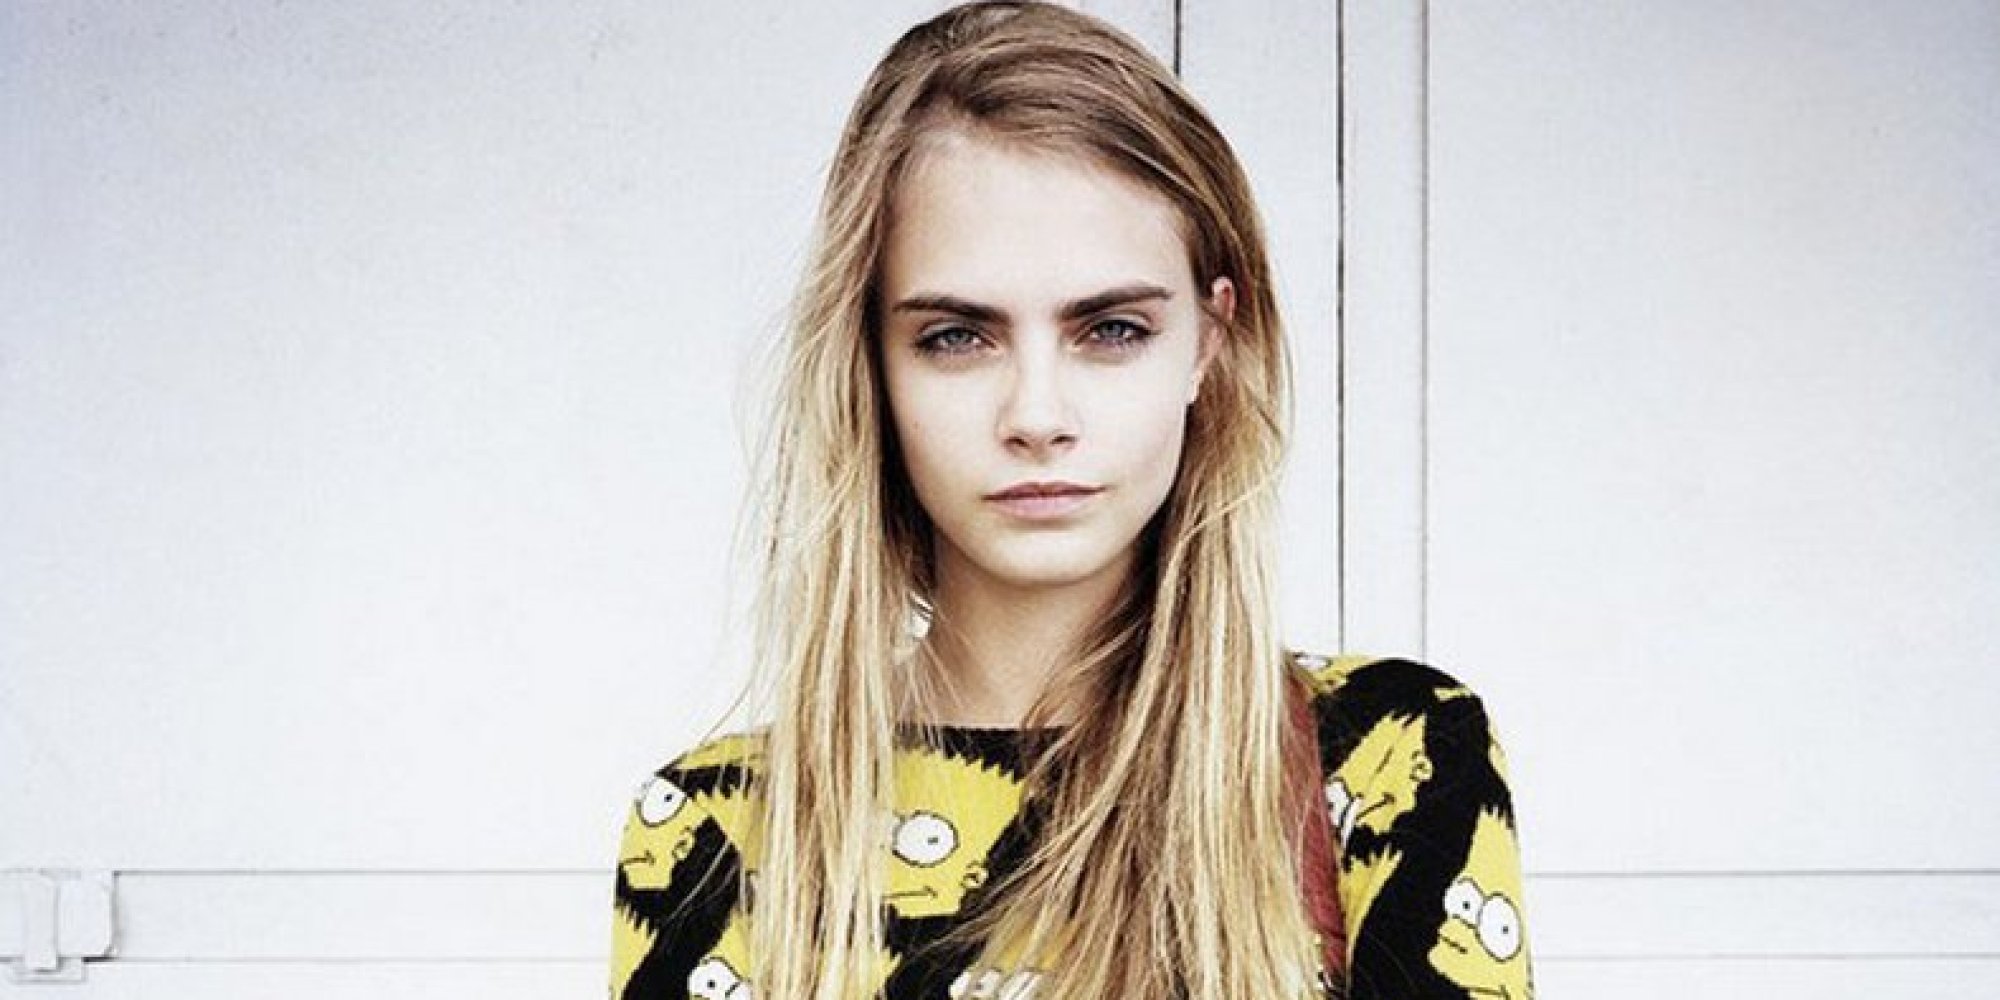 Cara Delevingne Best Looks: See The Supermodel's Top 5 Fashion Moments ...